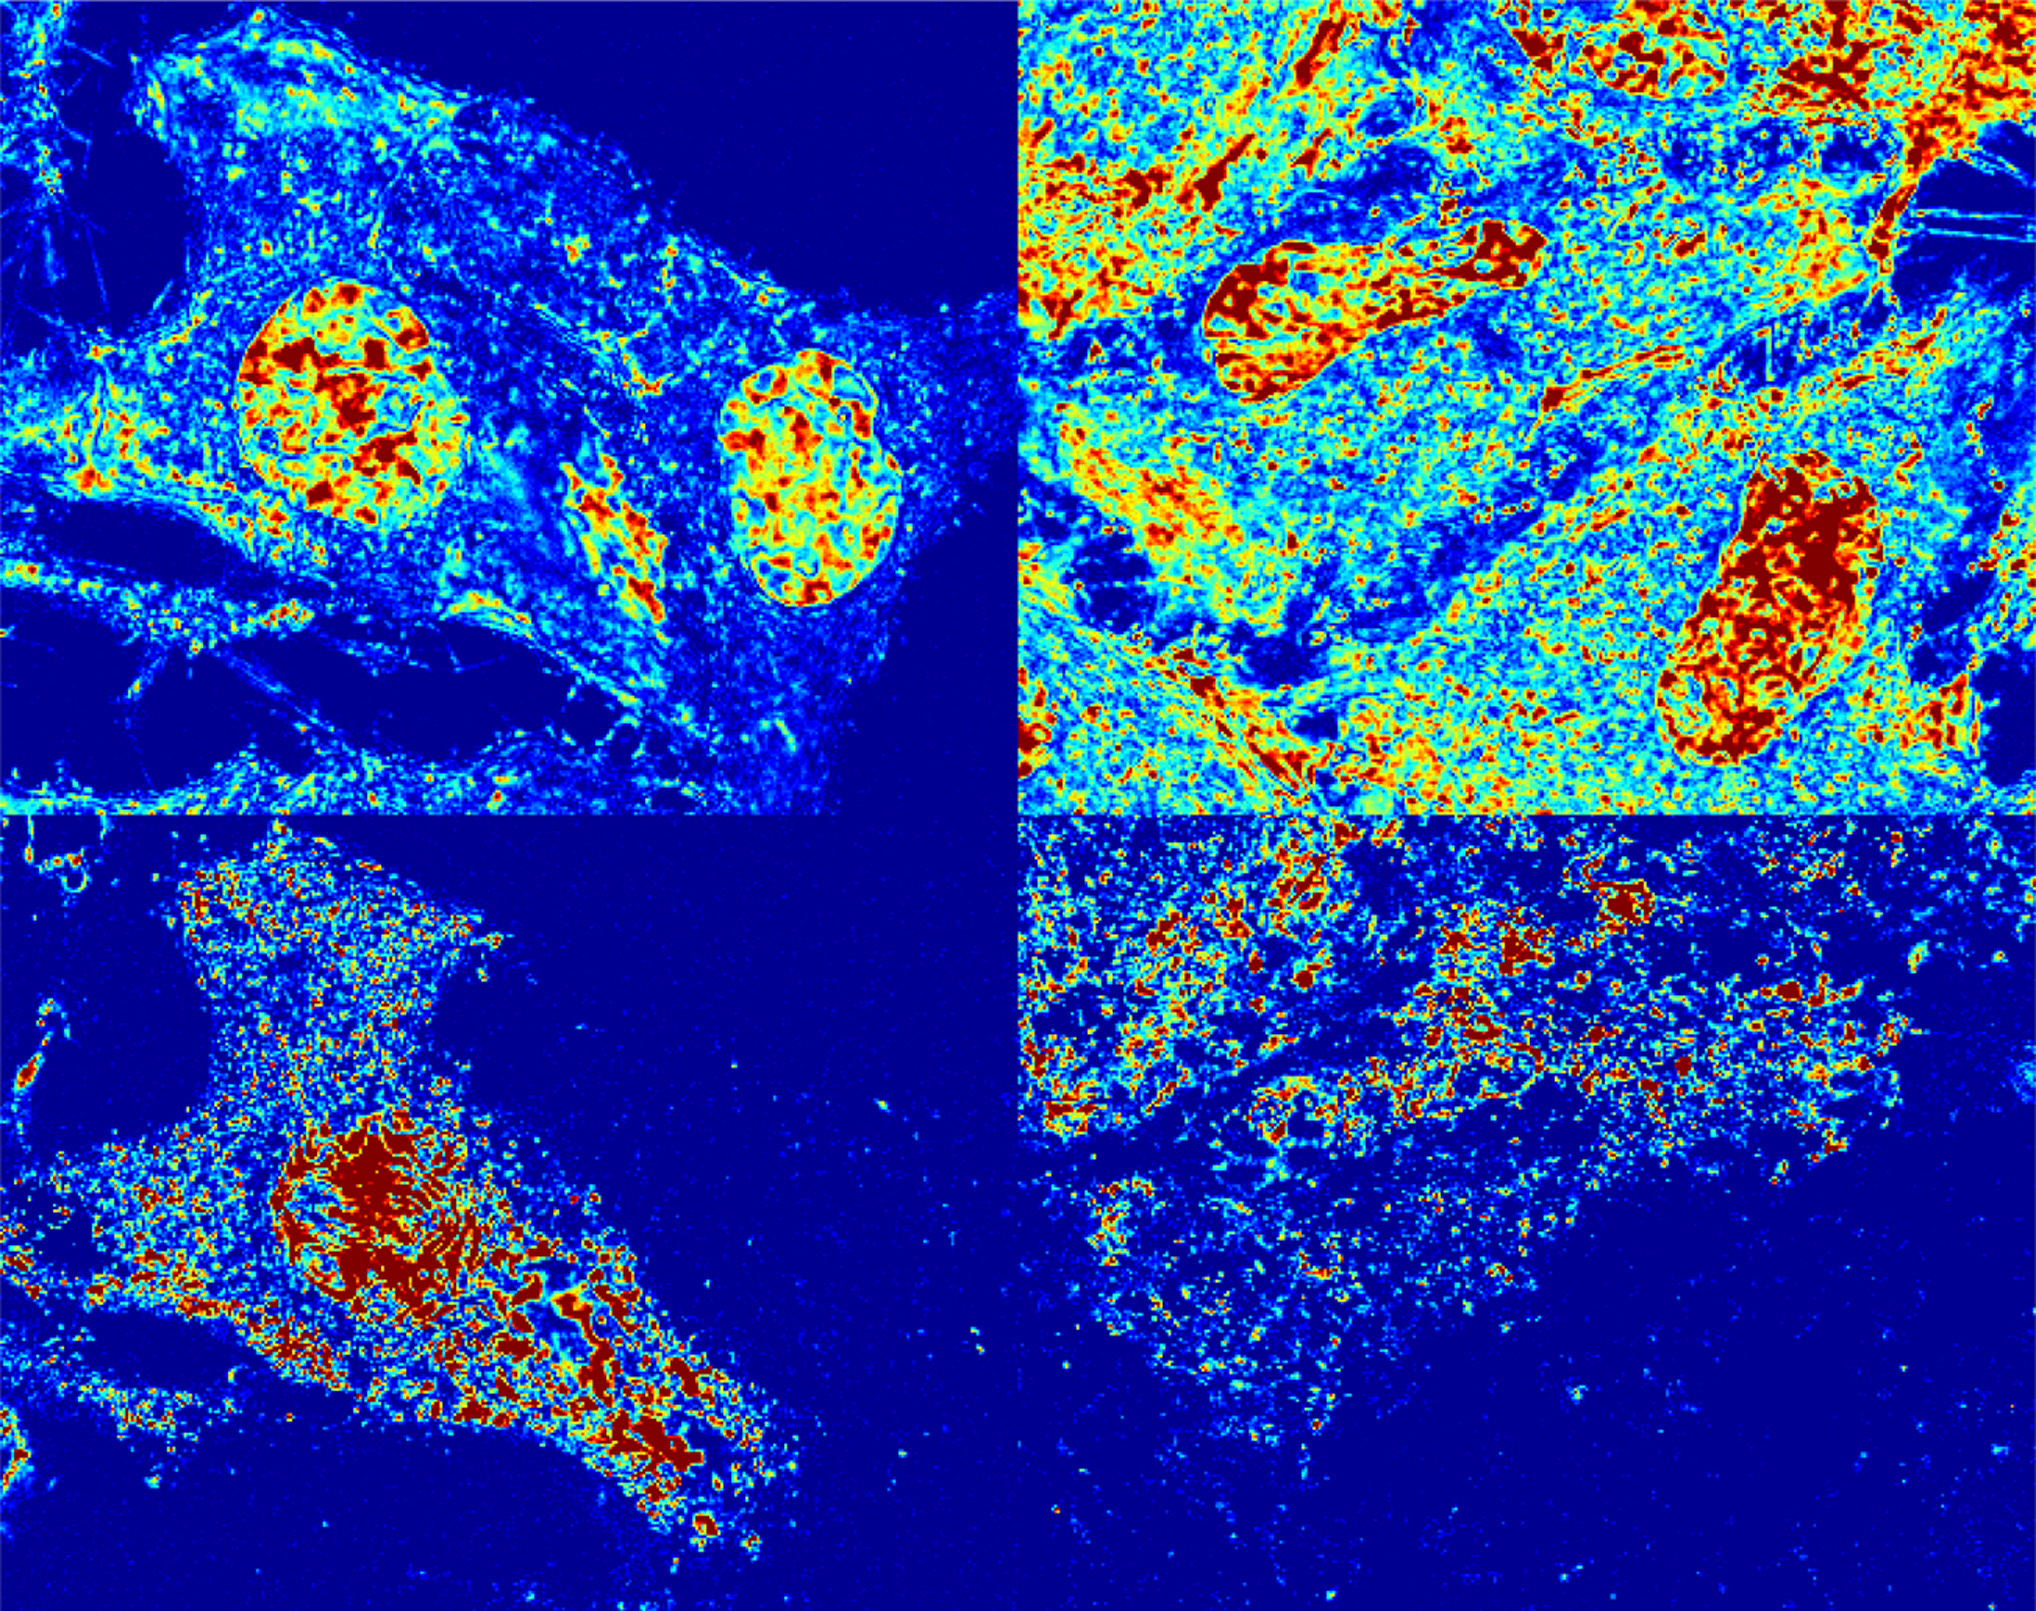 Four blocks of cancer cell representations on blue background